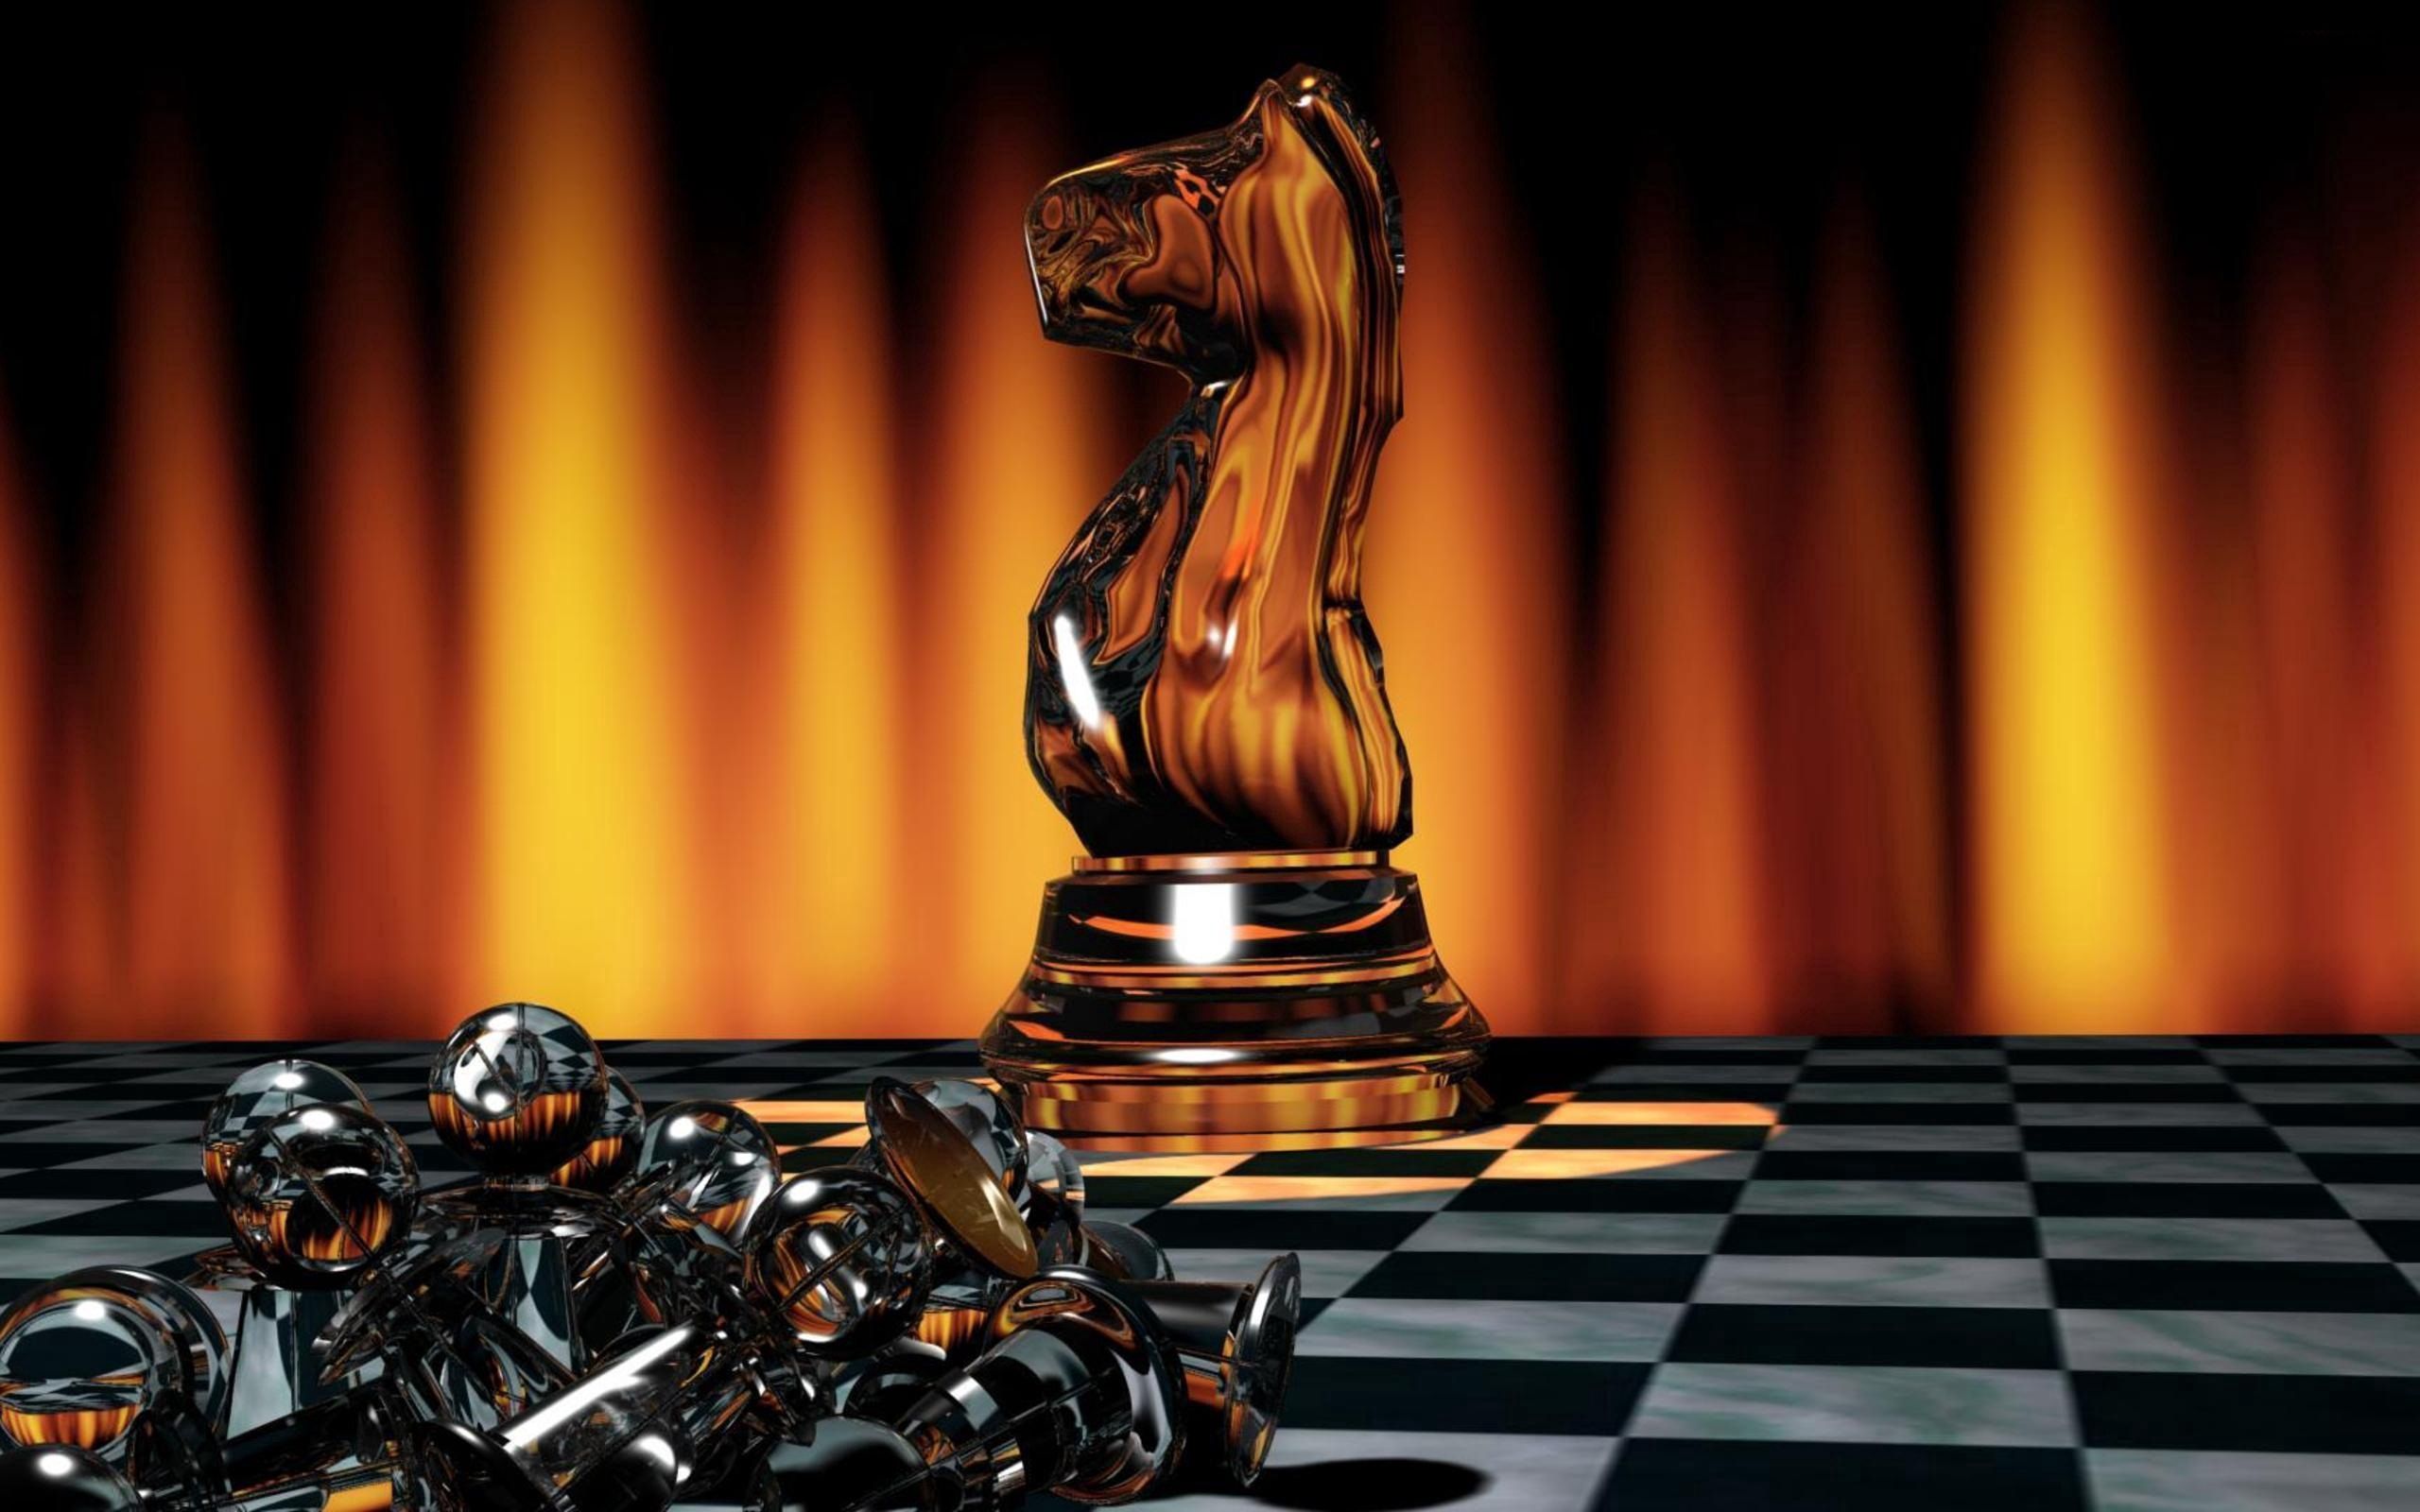 android chess, chessmen, 3d, chess pieces, game, shine, light, board